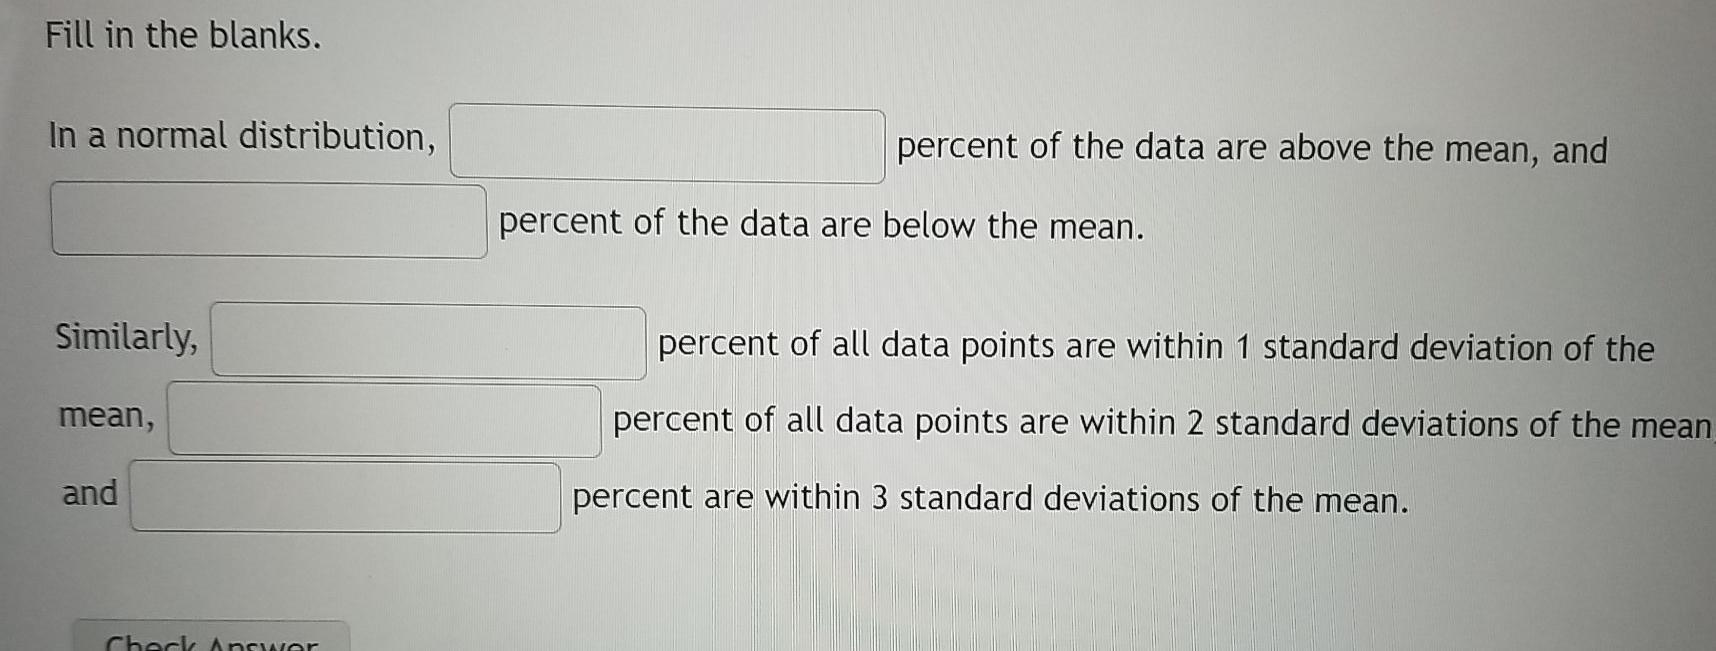 Fill in the blanks. In a normal distribution, percent of the data are above the mean, and percent of the data are below the m